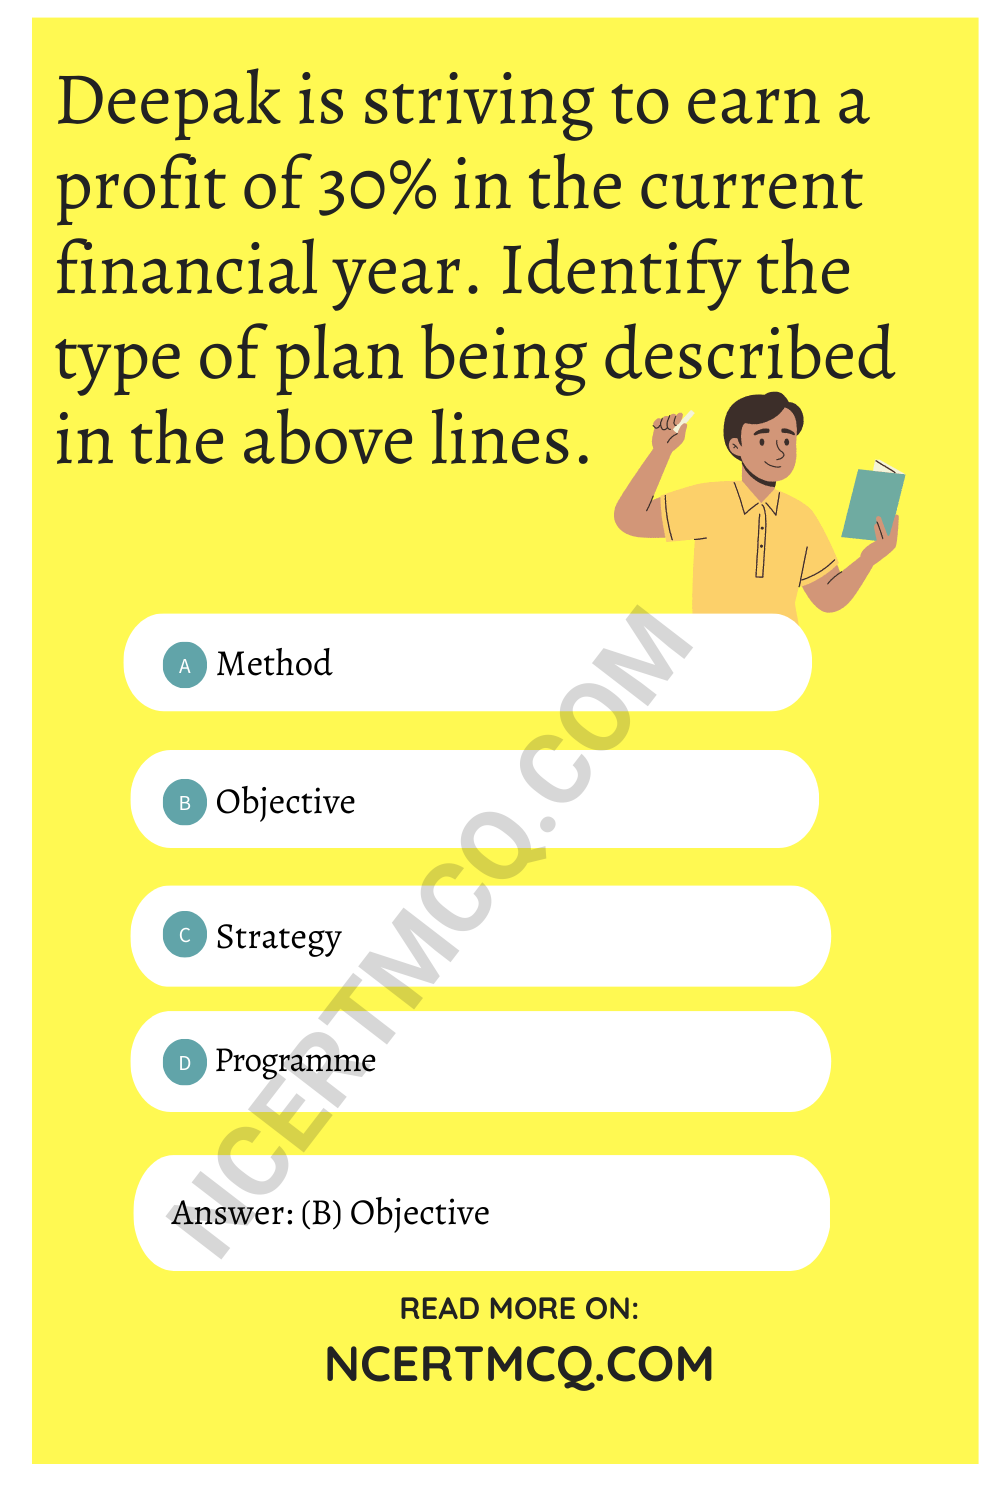 Deepak is striving to earn a profit of 30% in the current financial year. Identify the type of plan being described in the above lines.